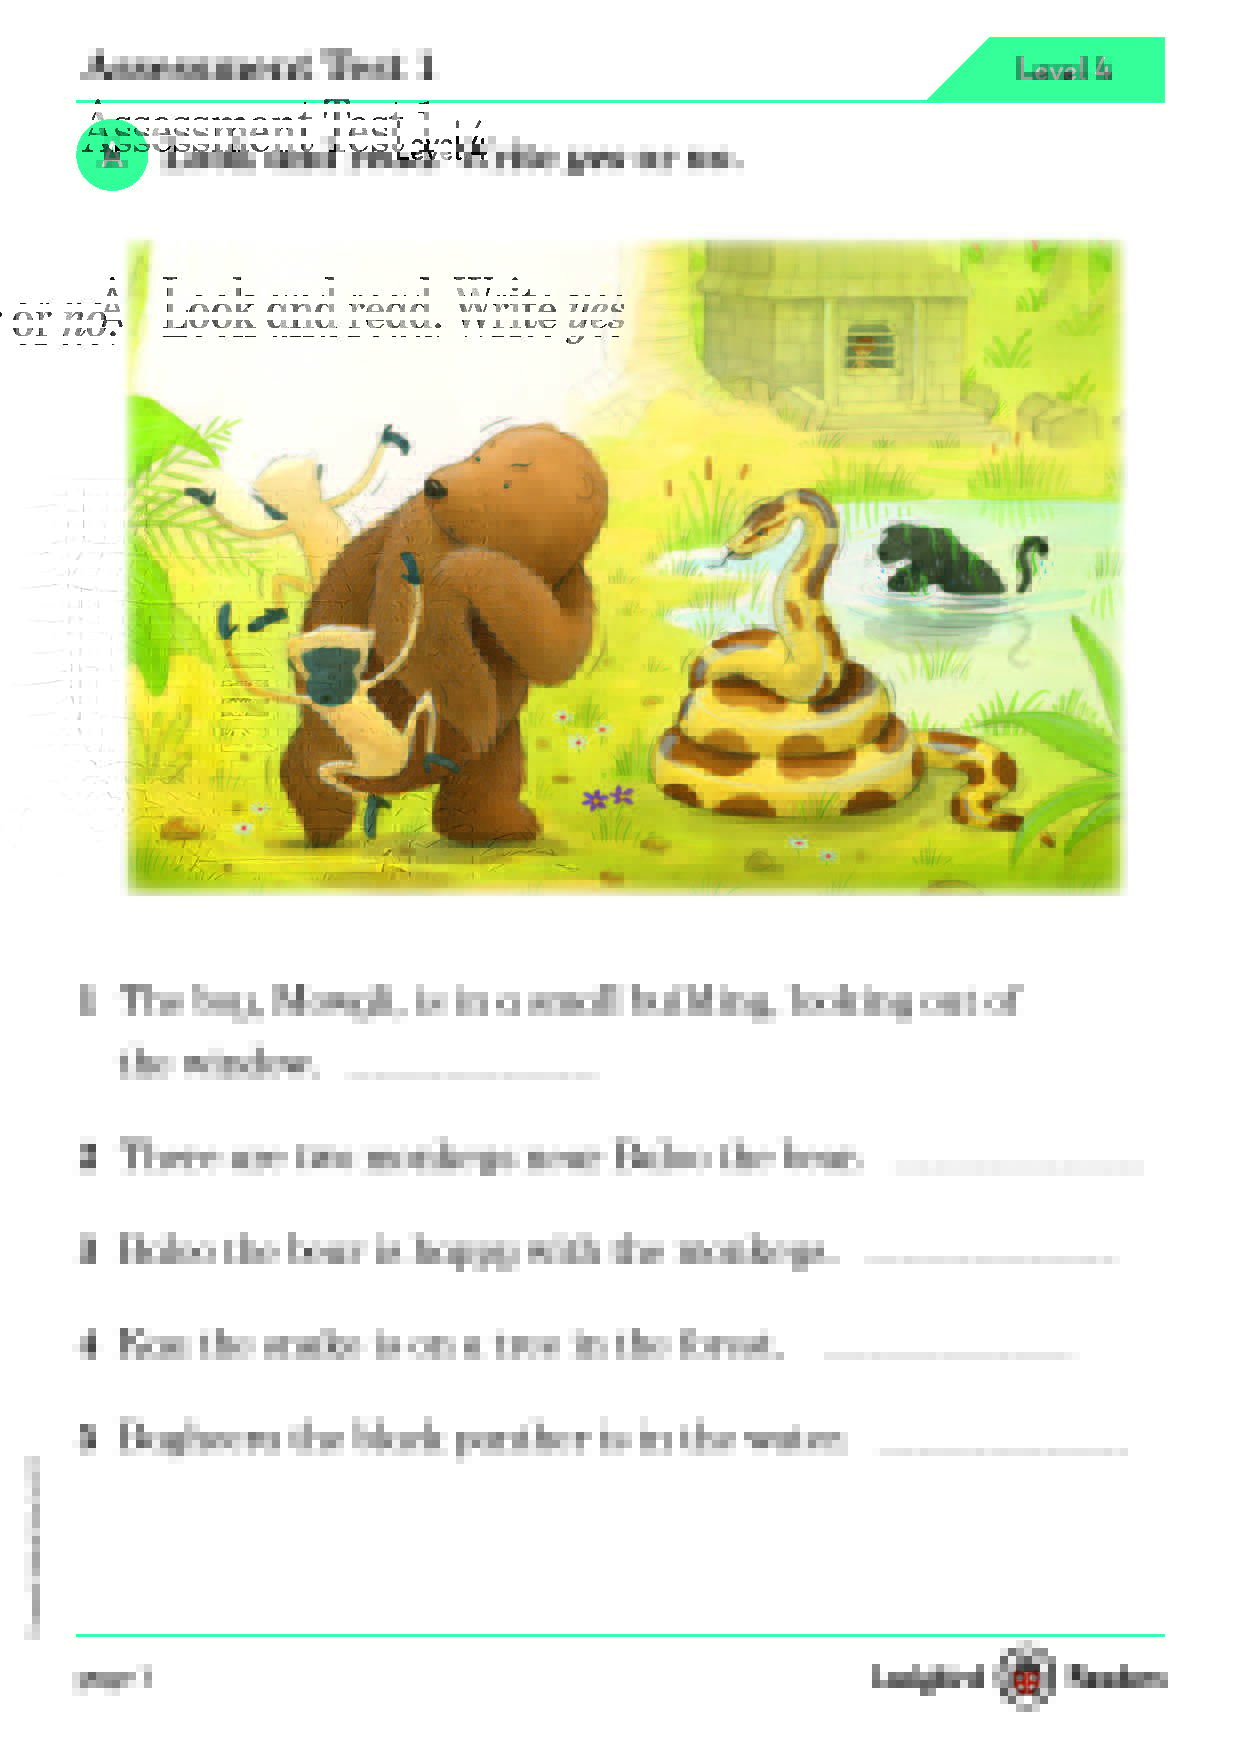 Ladybird Readers Level 4 Assessment Tests and Answer Keys